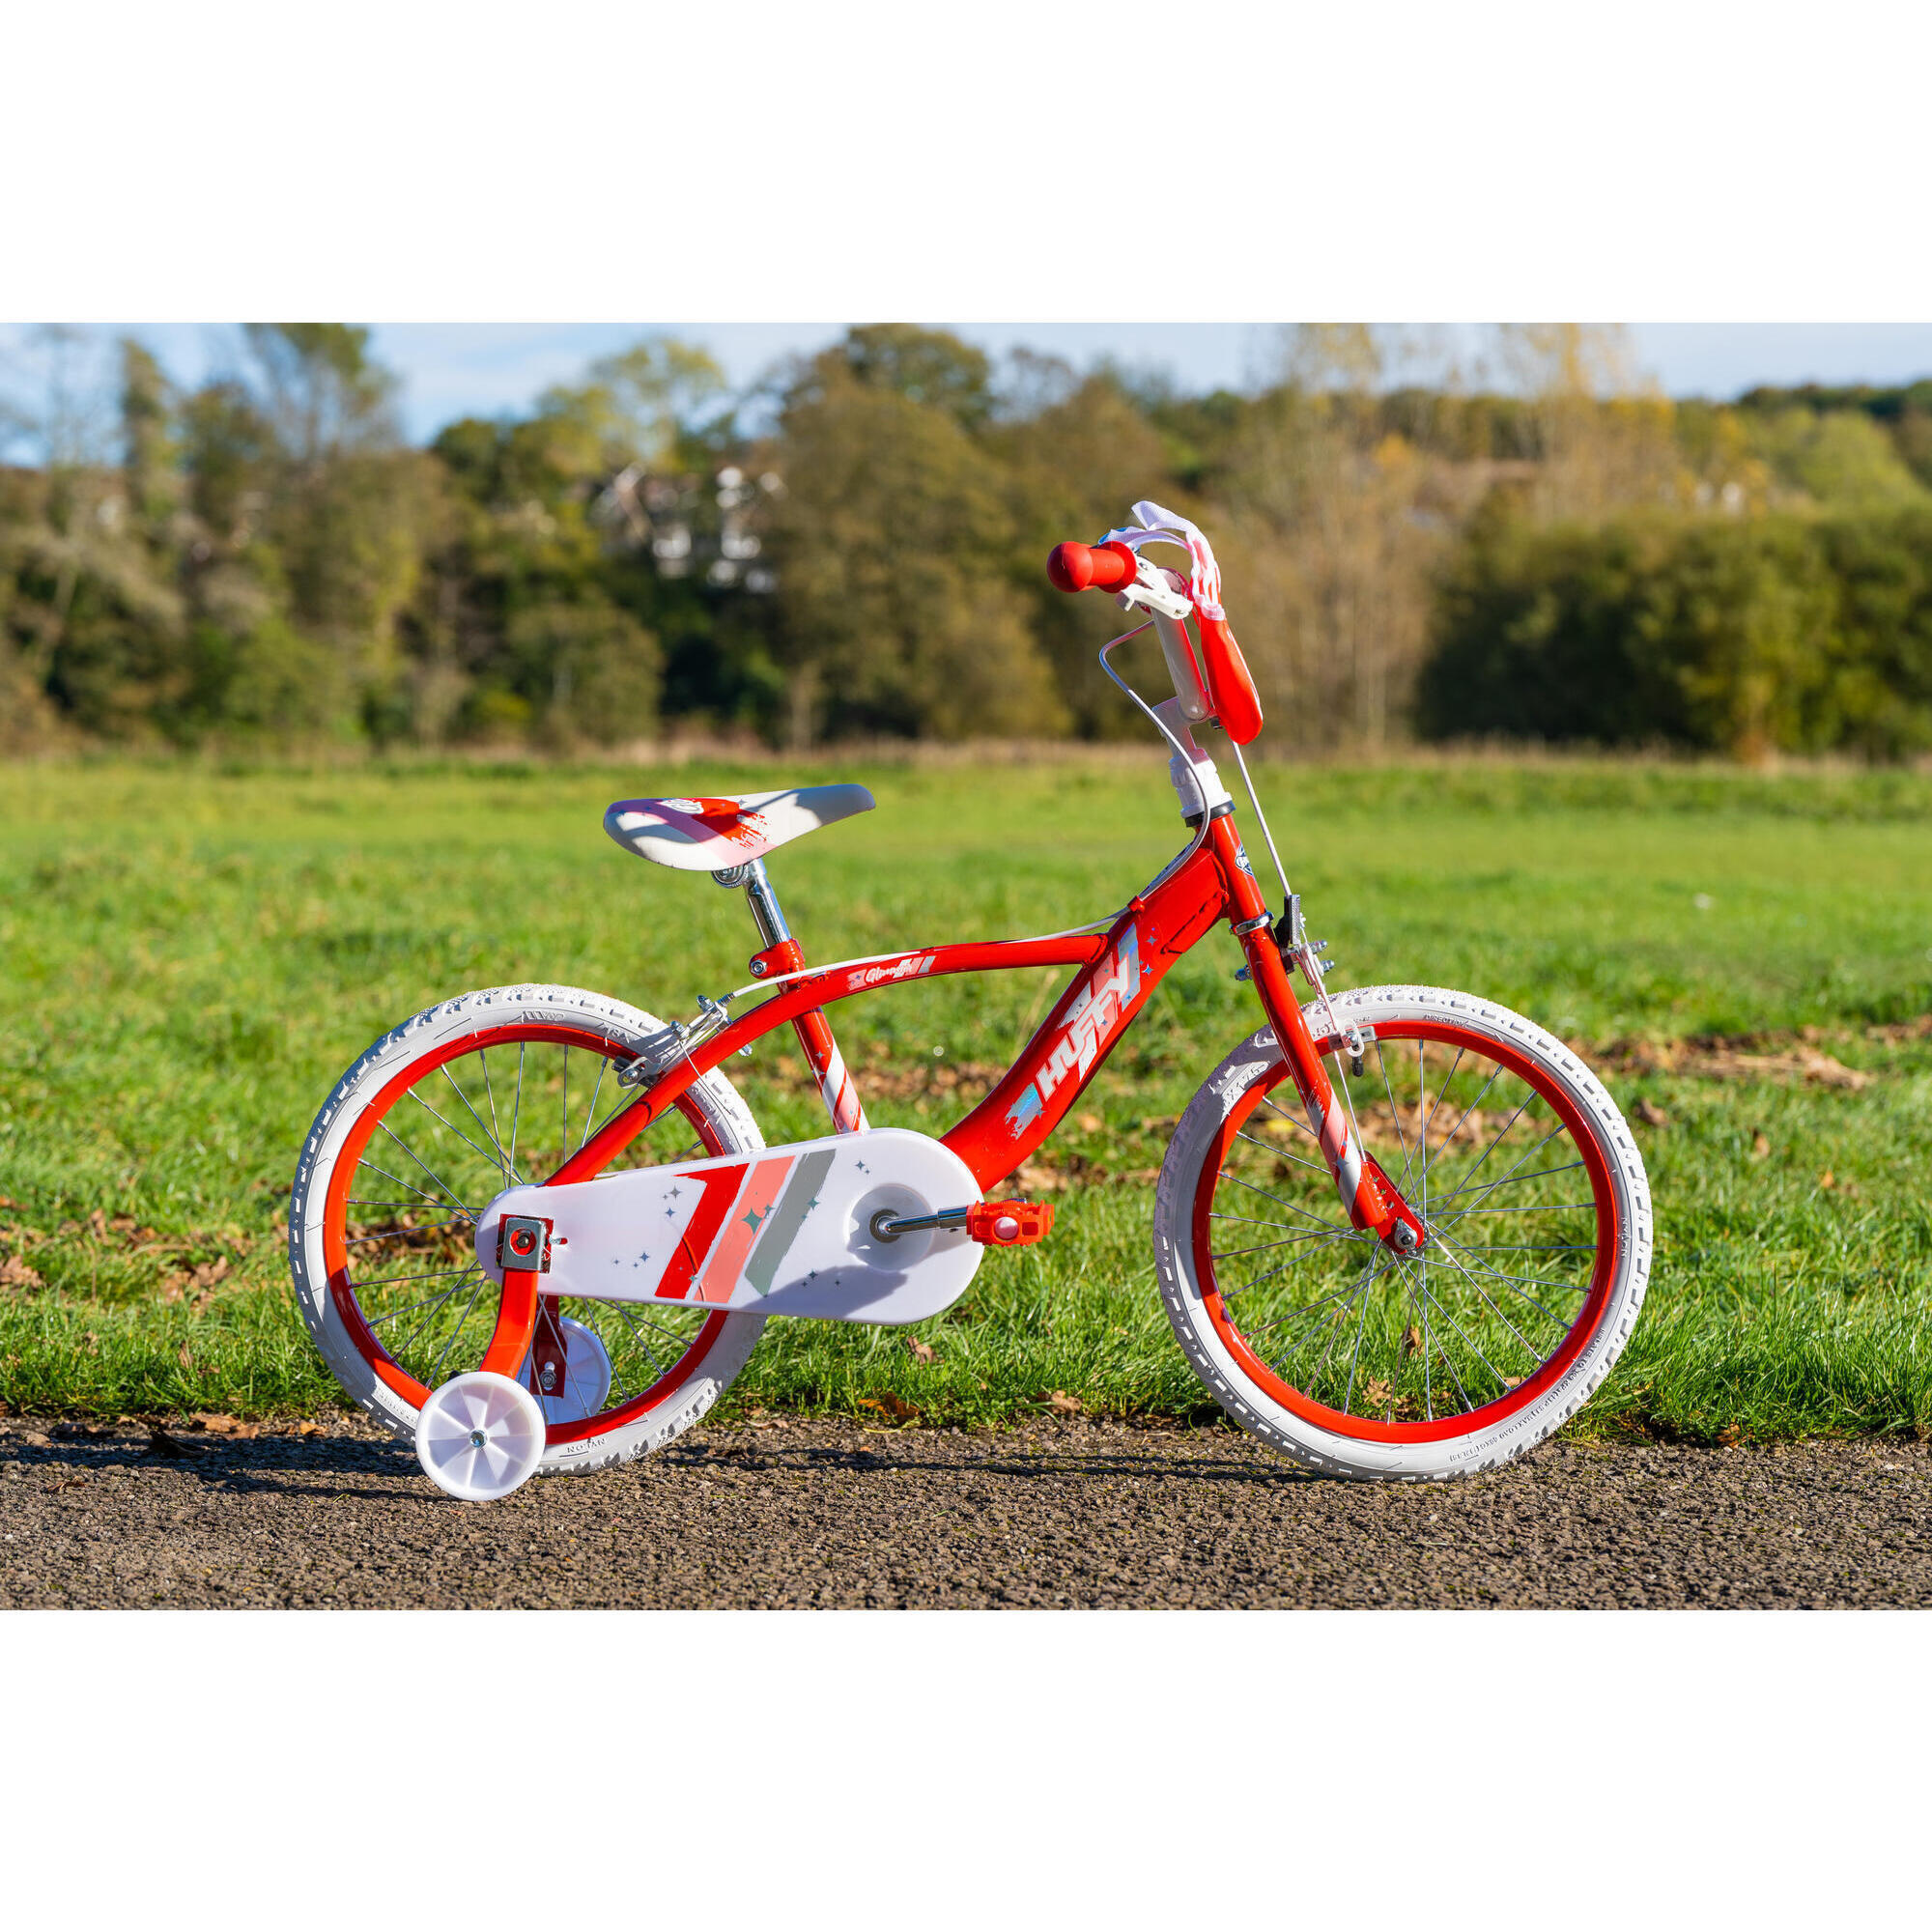 Huffy Glimmer 18" Girls Bike Red 5-7yrs Quick Connect + Stabilisers 5/7